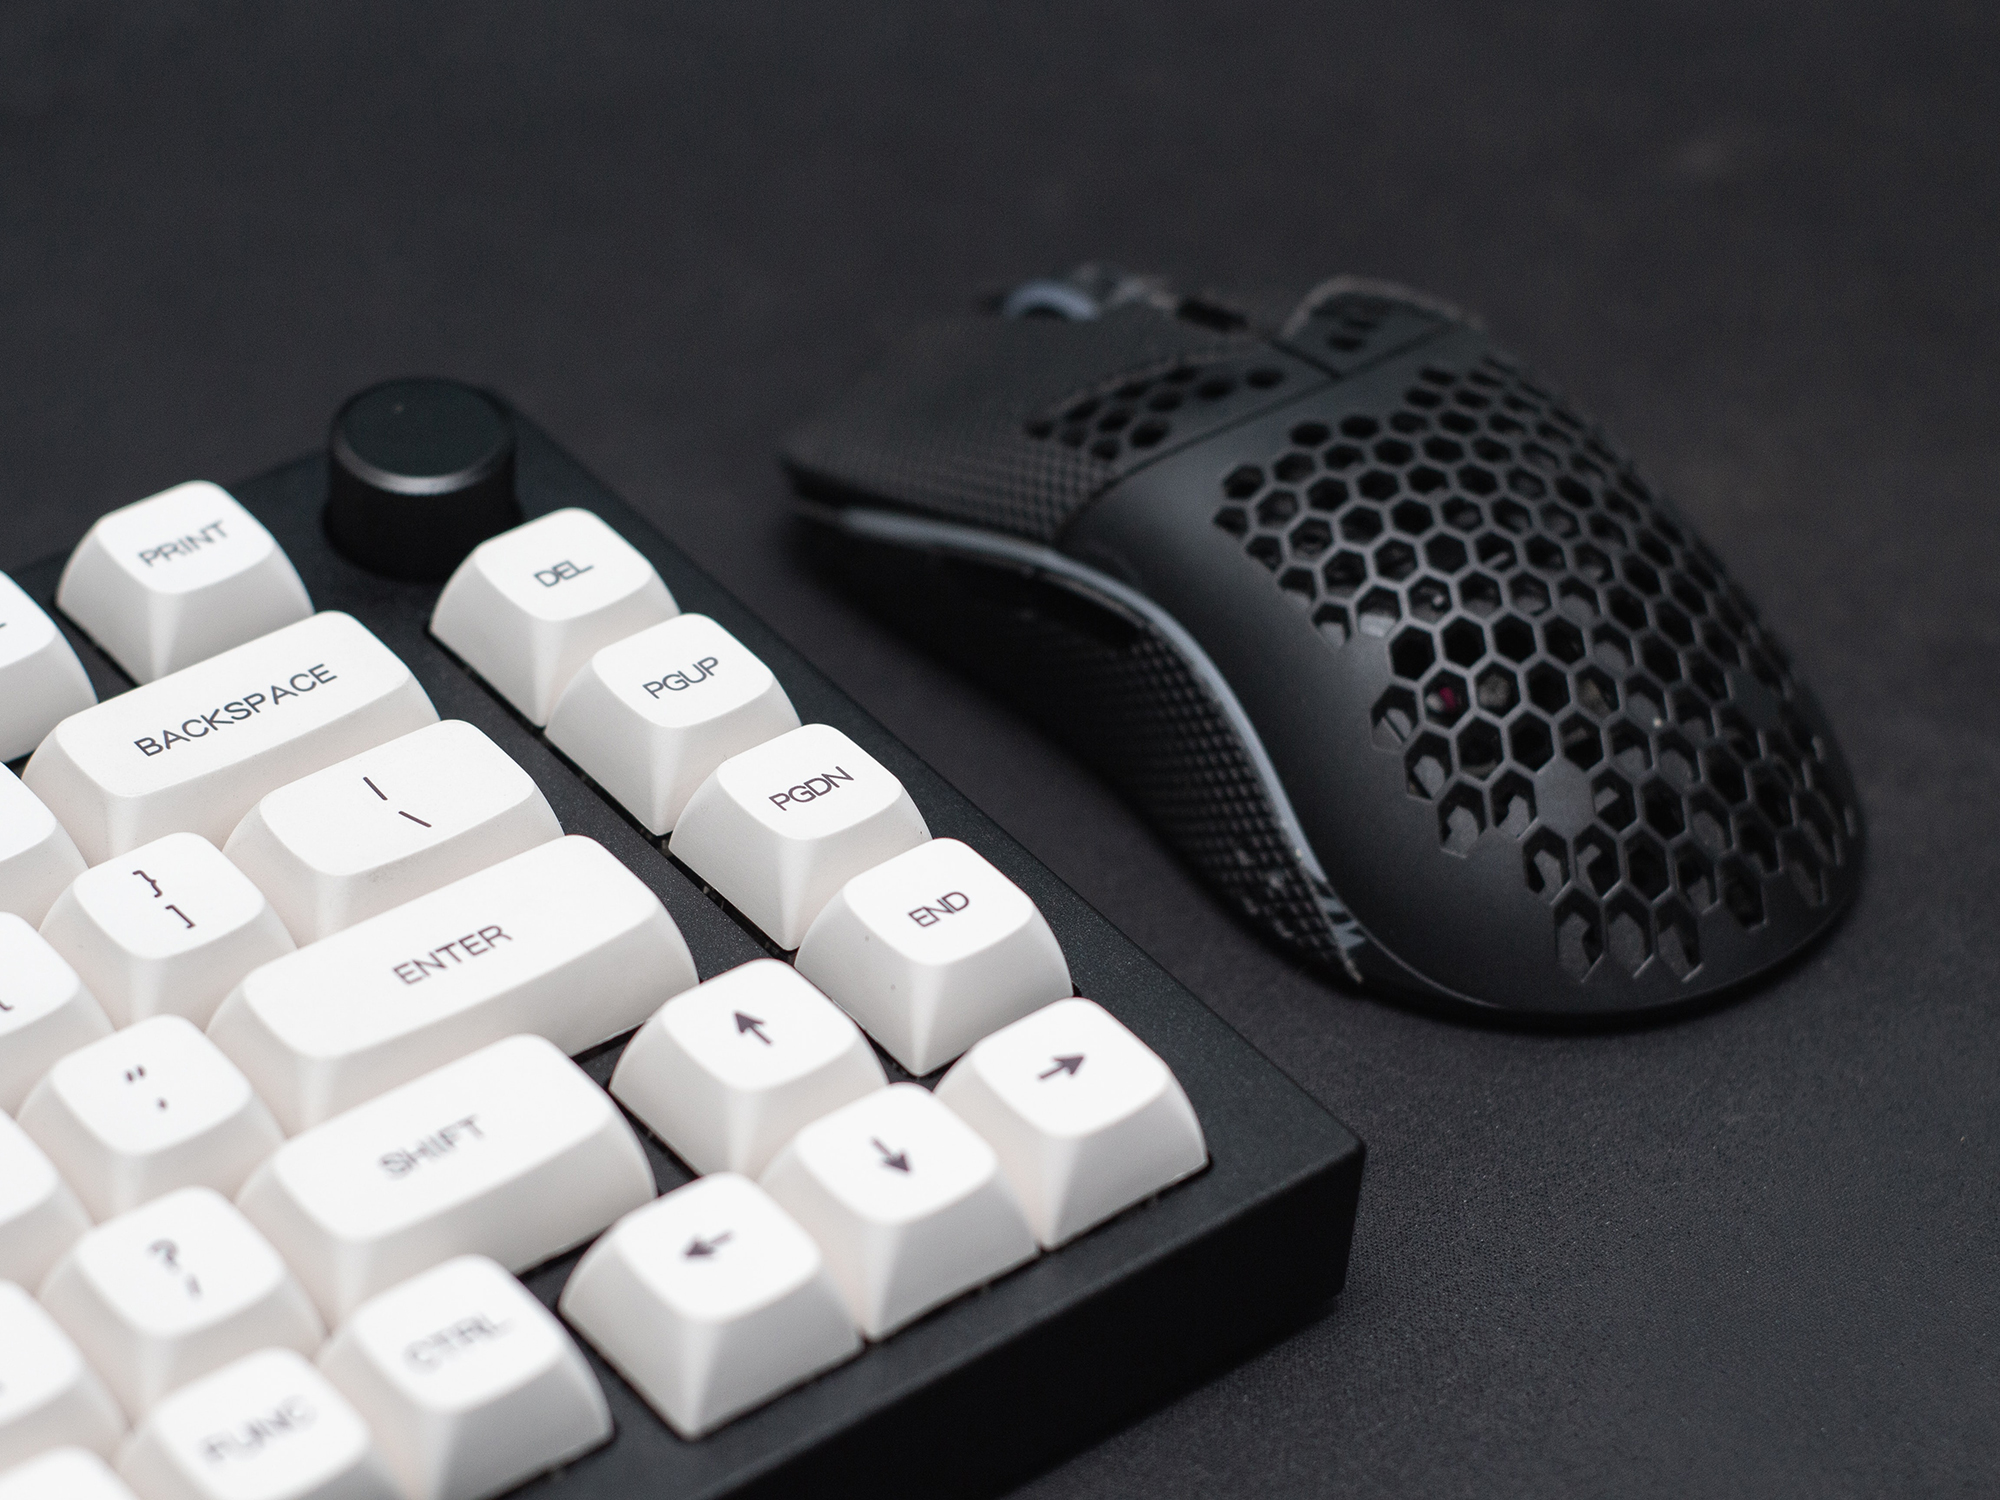 photo of a white keyboard and a black mouse